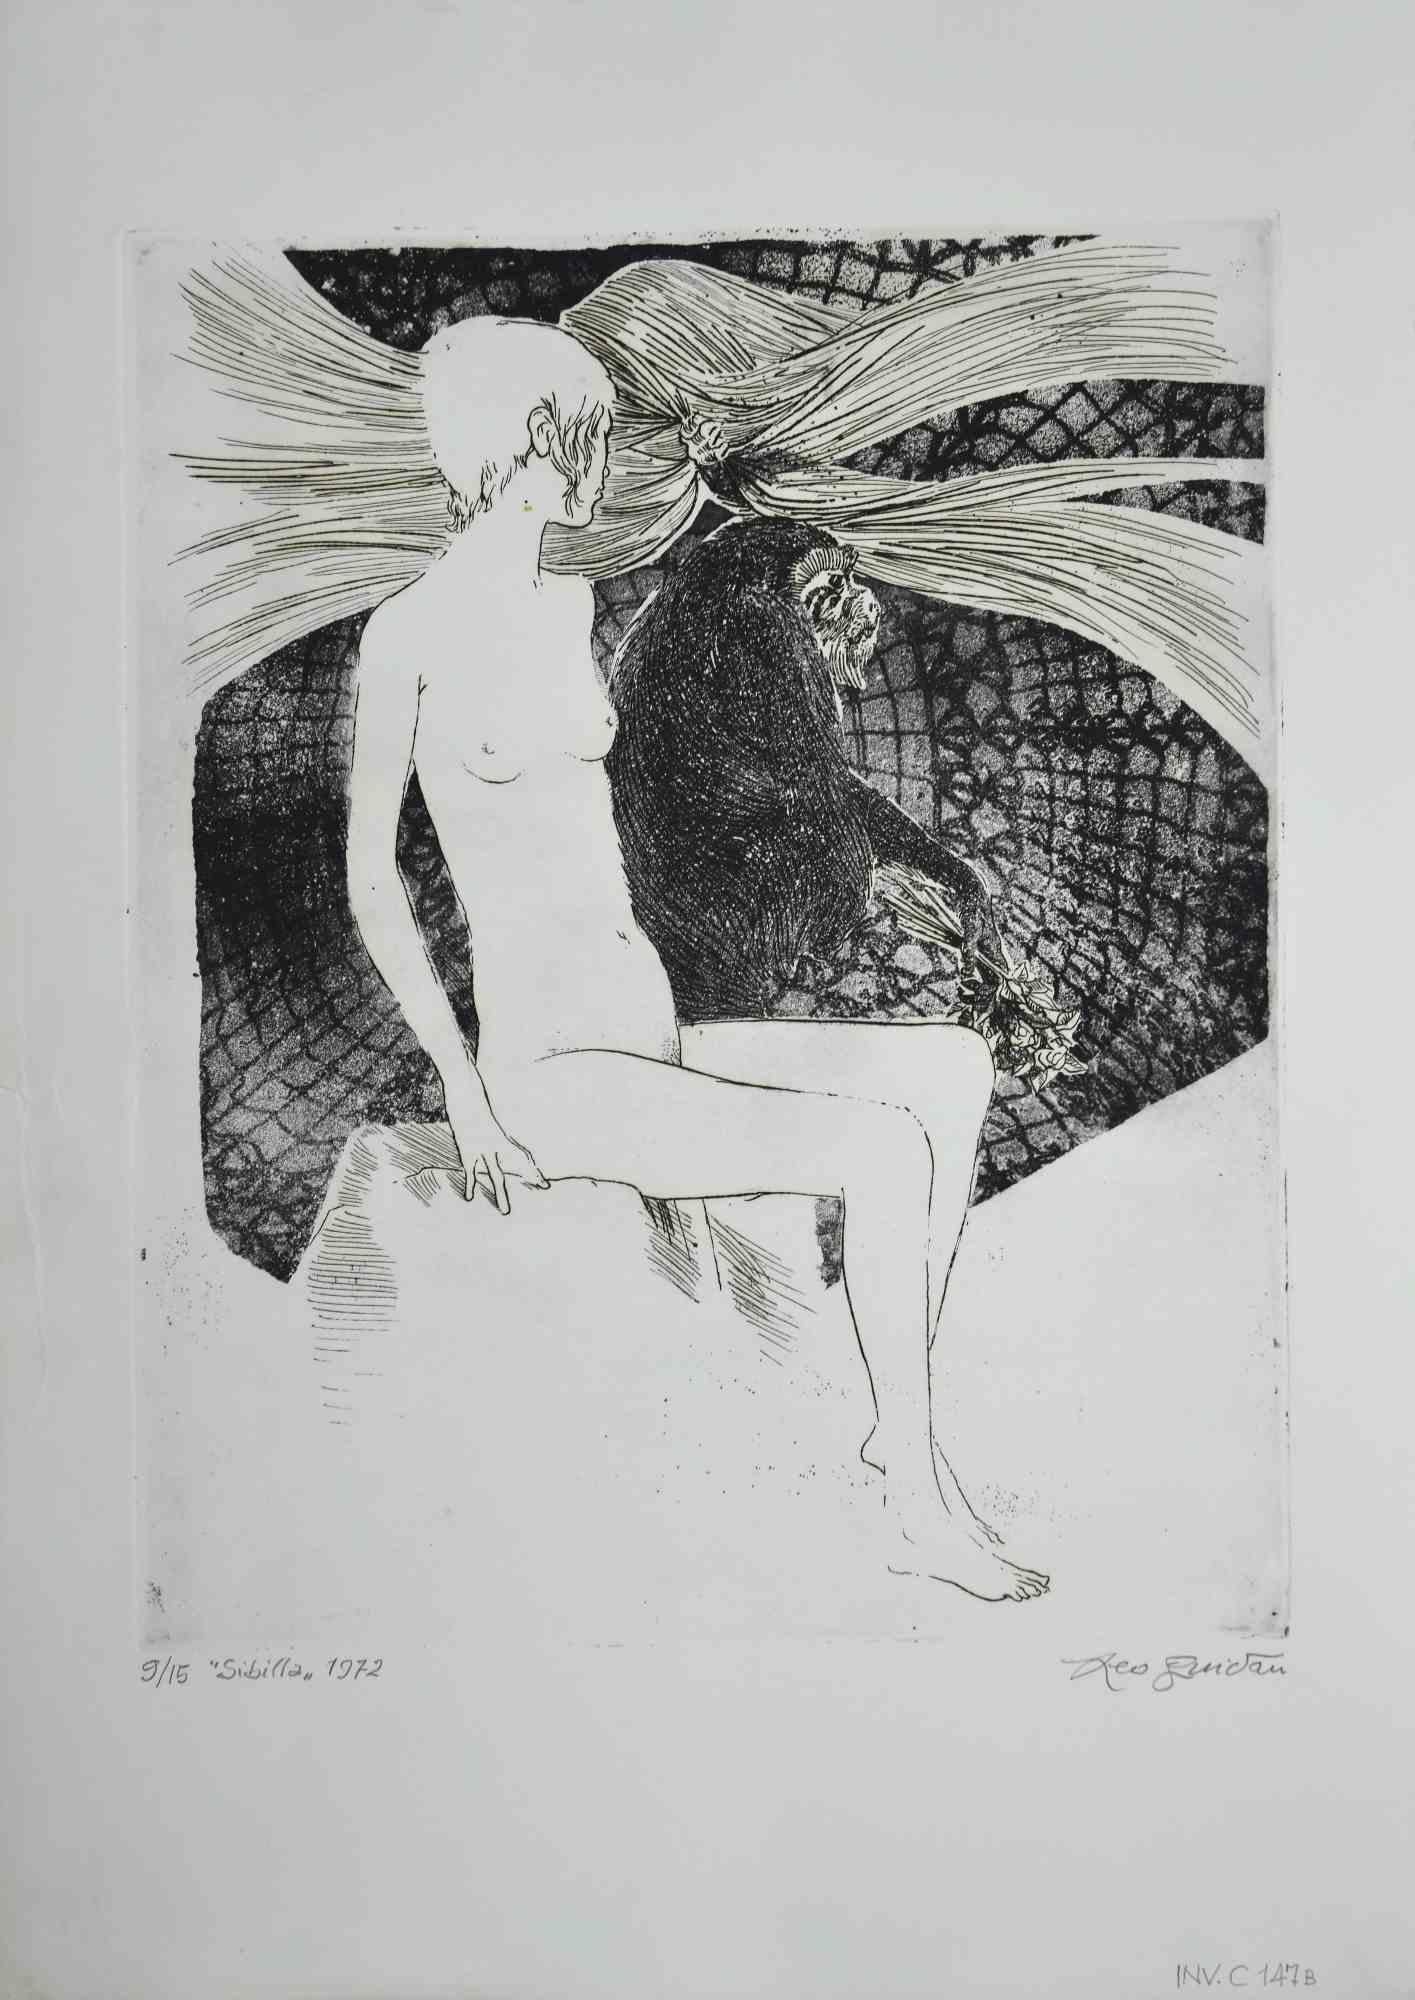 Sybil is an original etching print realized by Leo Guida in 1972.

Hand-signed on the lower right and dated, titled in pencil and numbered on the lower left, from the edition of 15 prints. 

Good condition.

Leo Guida  (1992 - 2017). Sensitive to